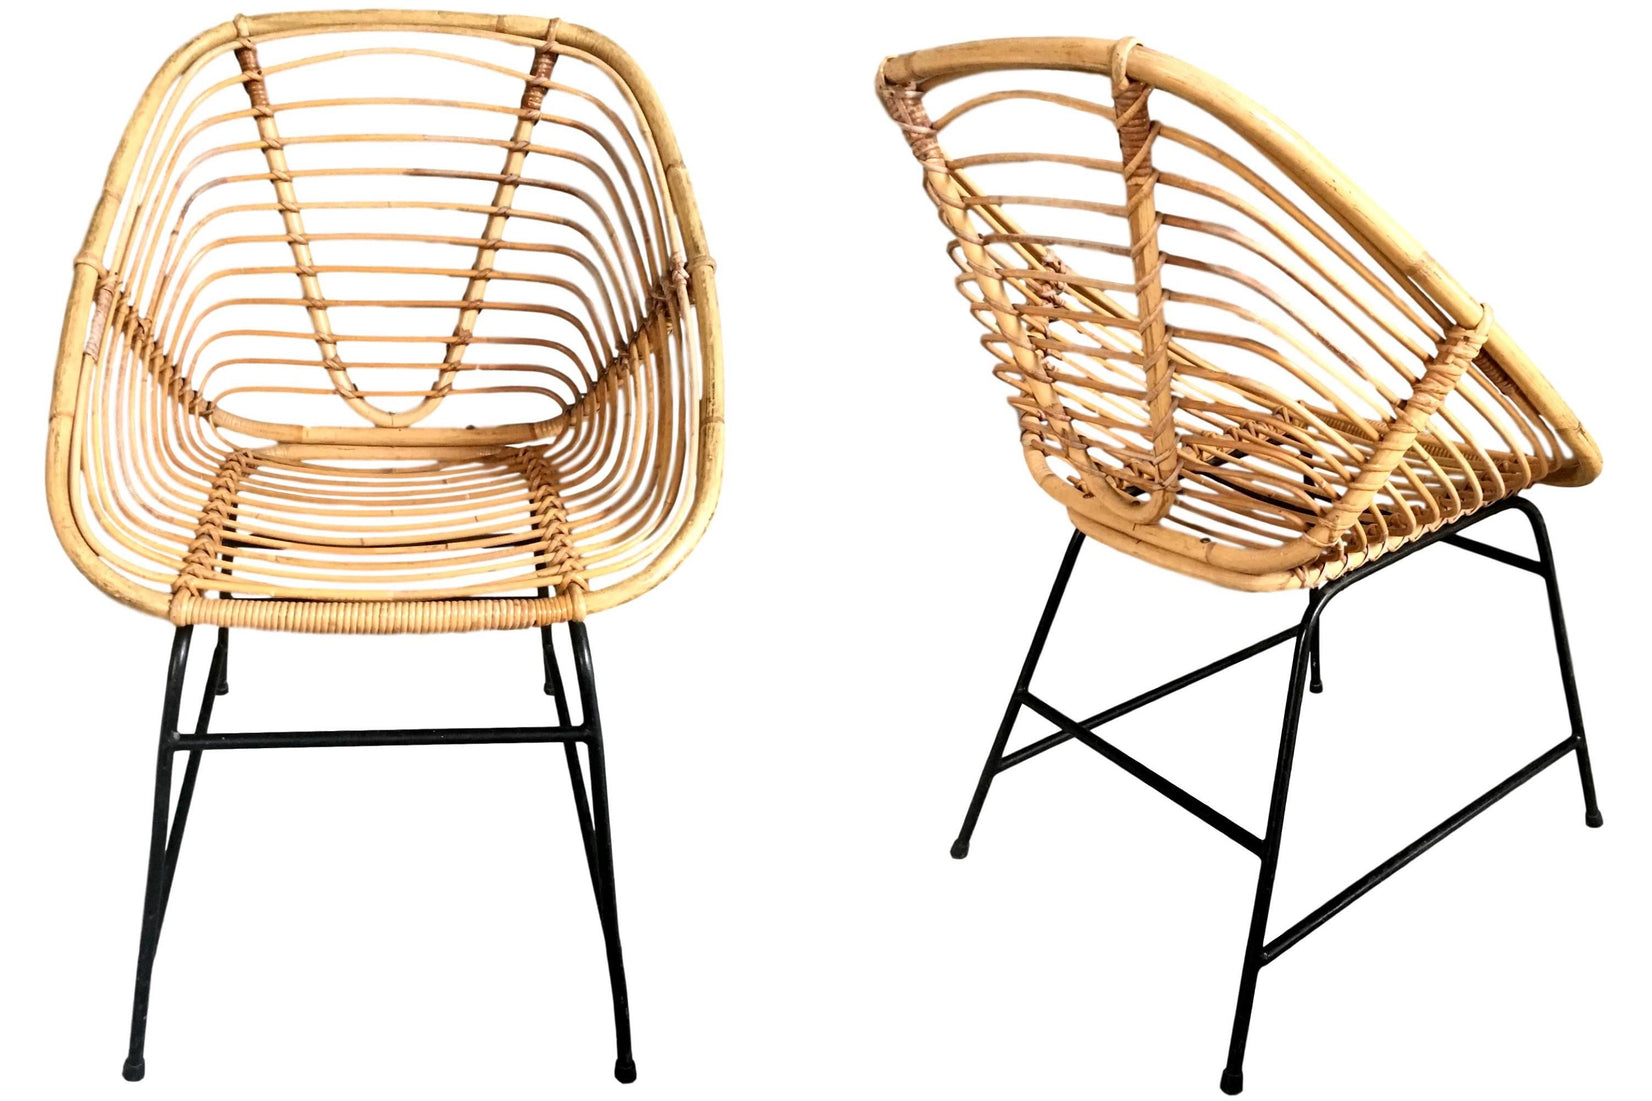 Vintage French Wicker and Rattan Chairs, 1950s France